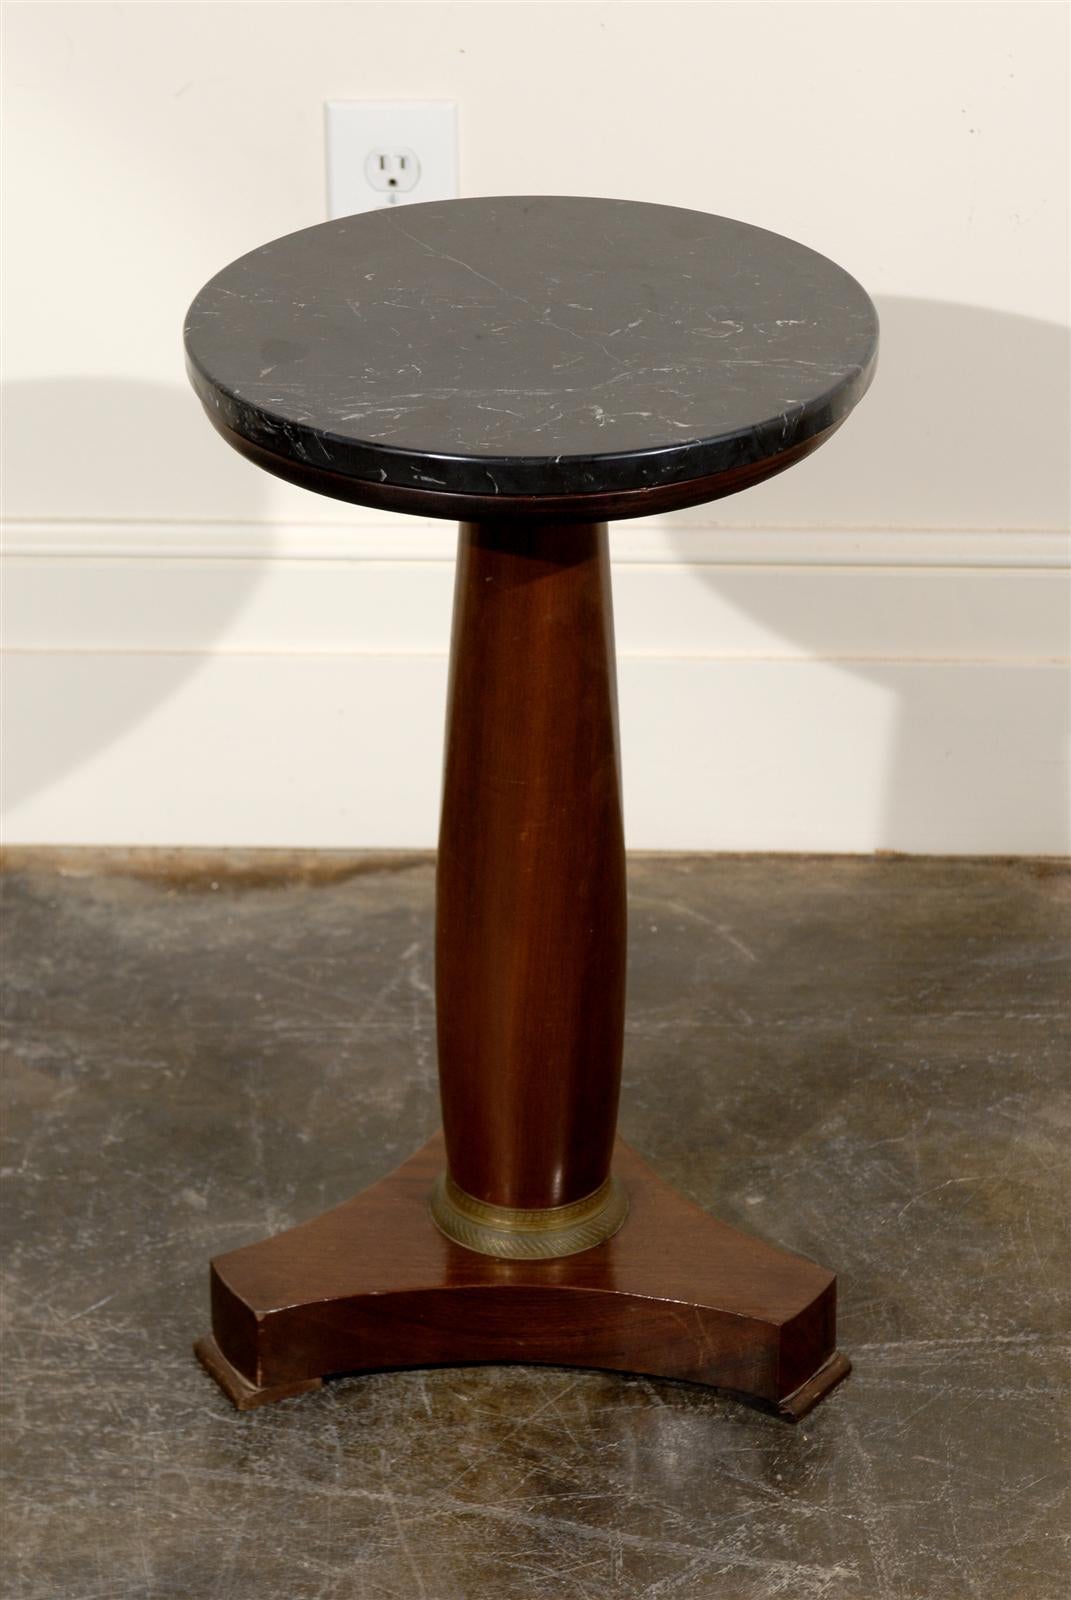 Round French Empire pedestal table with marble top.